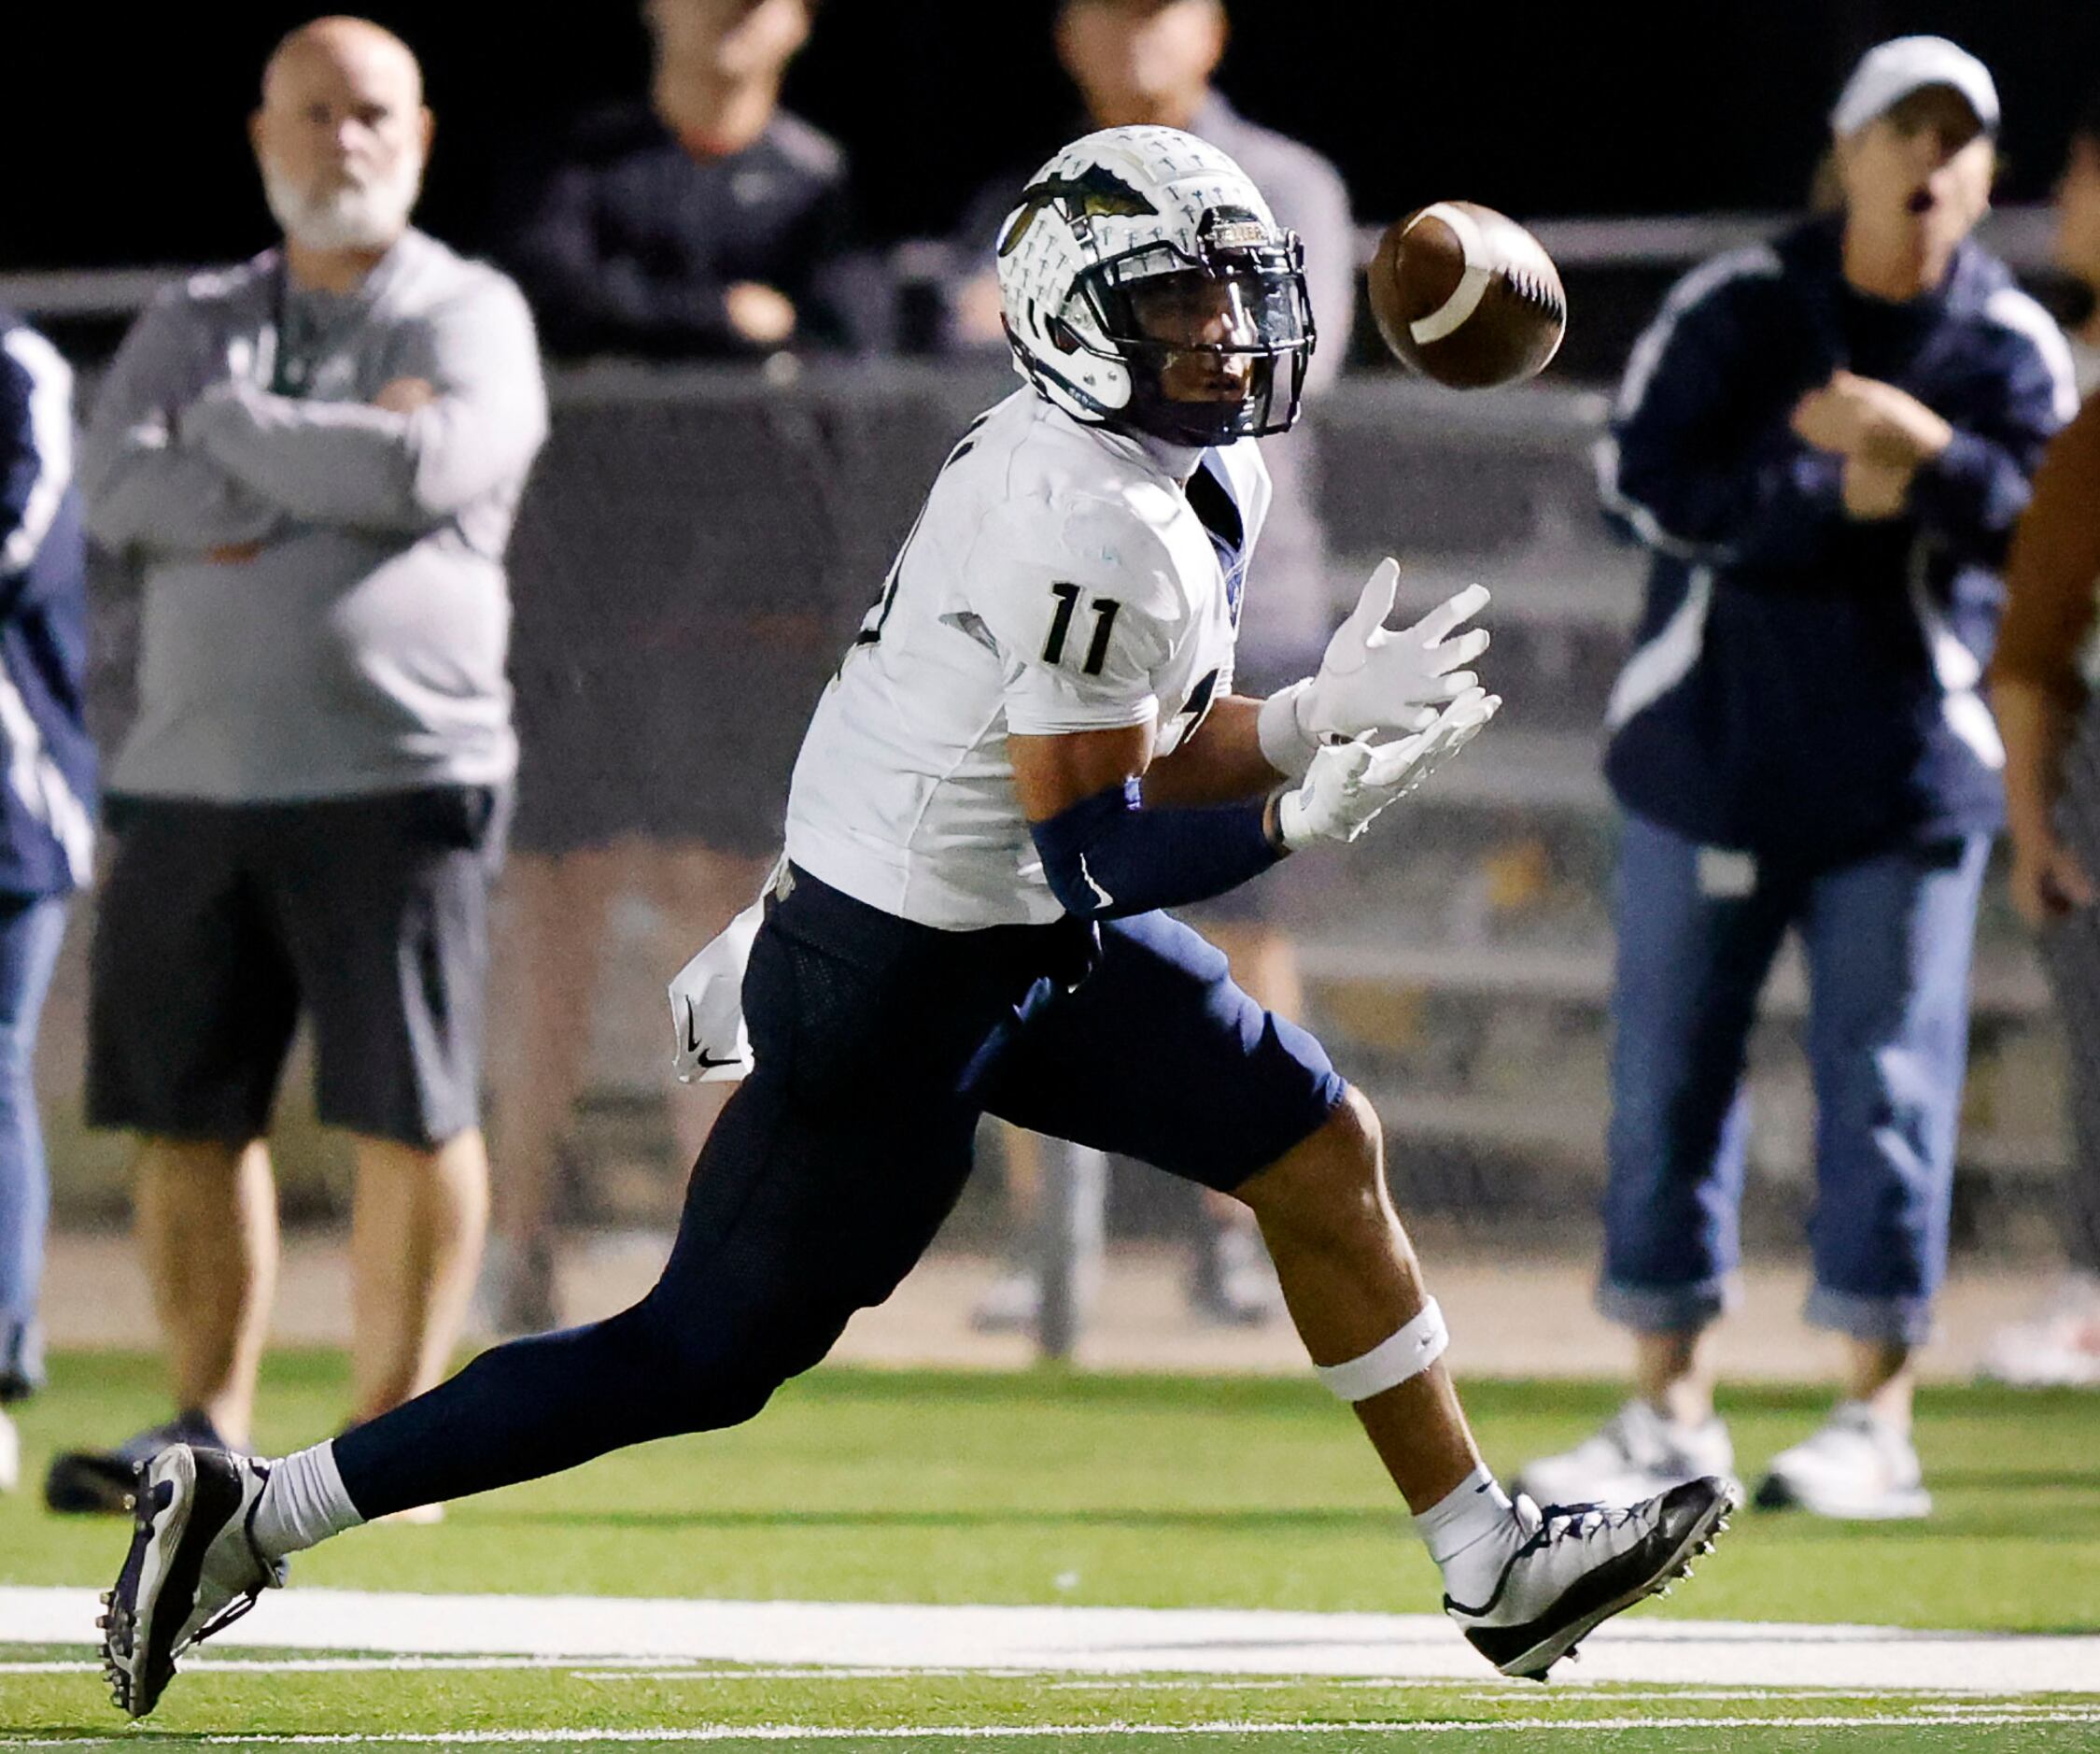 Keller wide receiver Amarion Henry (11) pulls in a pass along the sideline during the fourth...